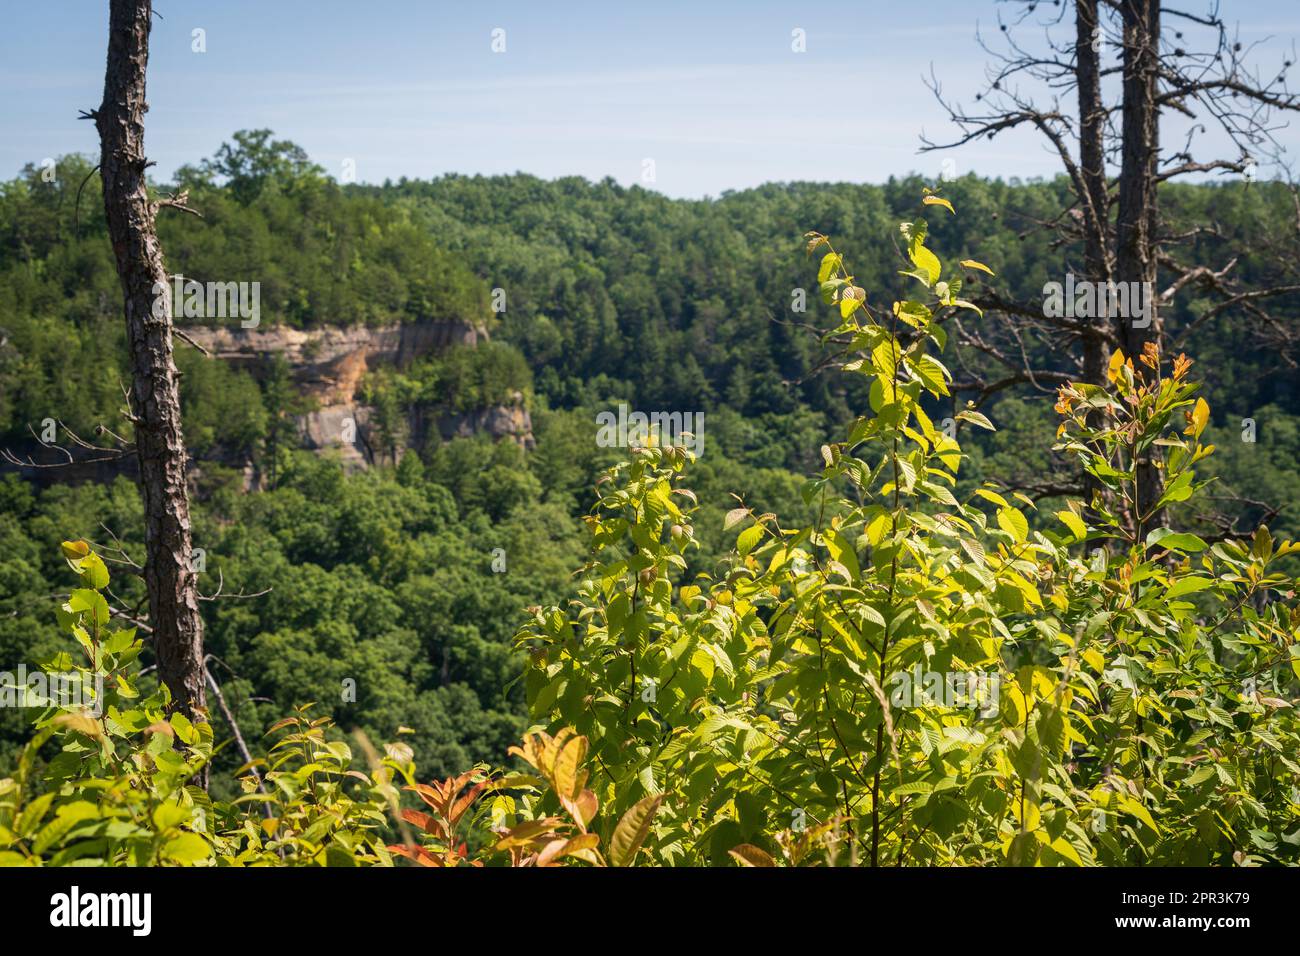 Red River Gorge Geological Area nel Kentucky Foto Stock